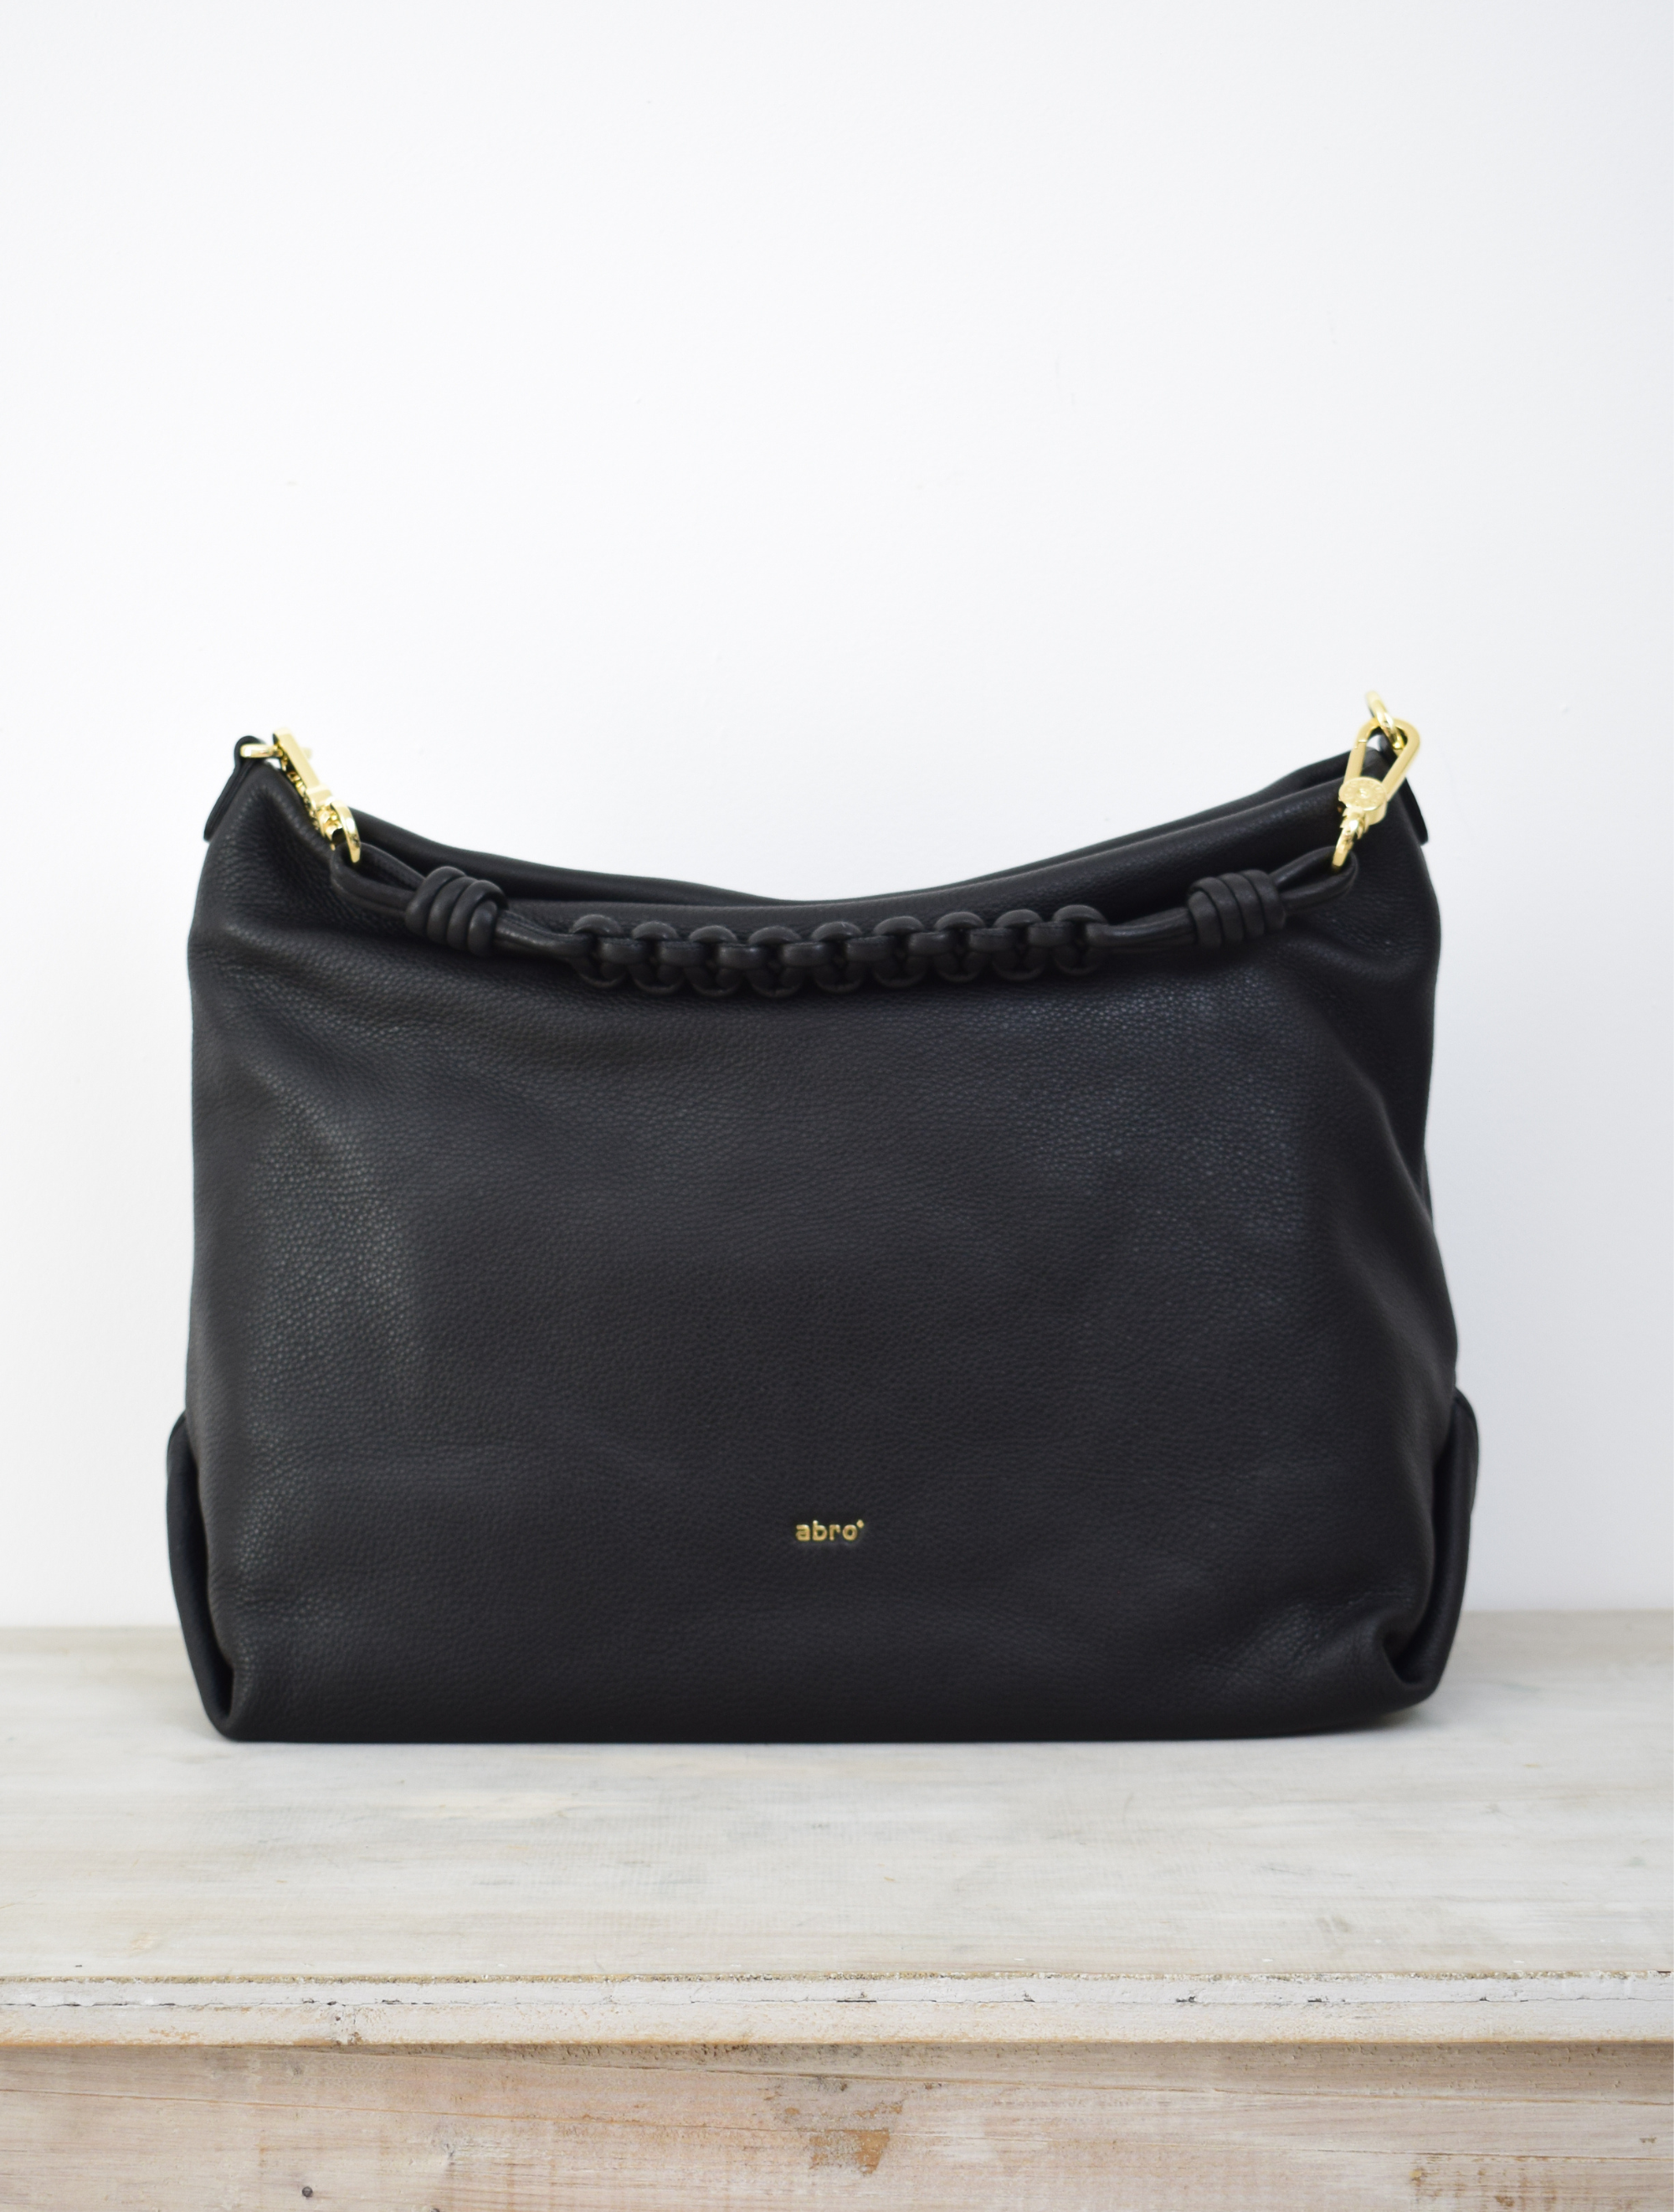 Italian black leather bag with a woven shoulder strap and cross body strap with gold toned hardwear